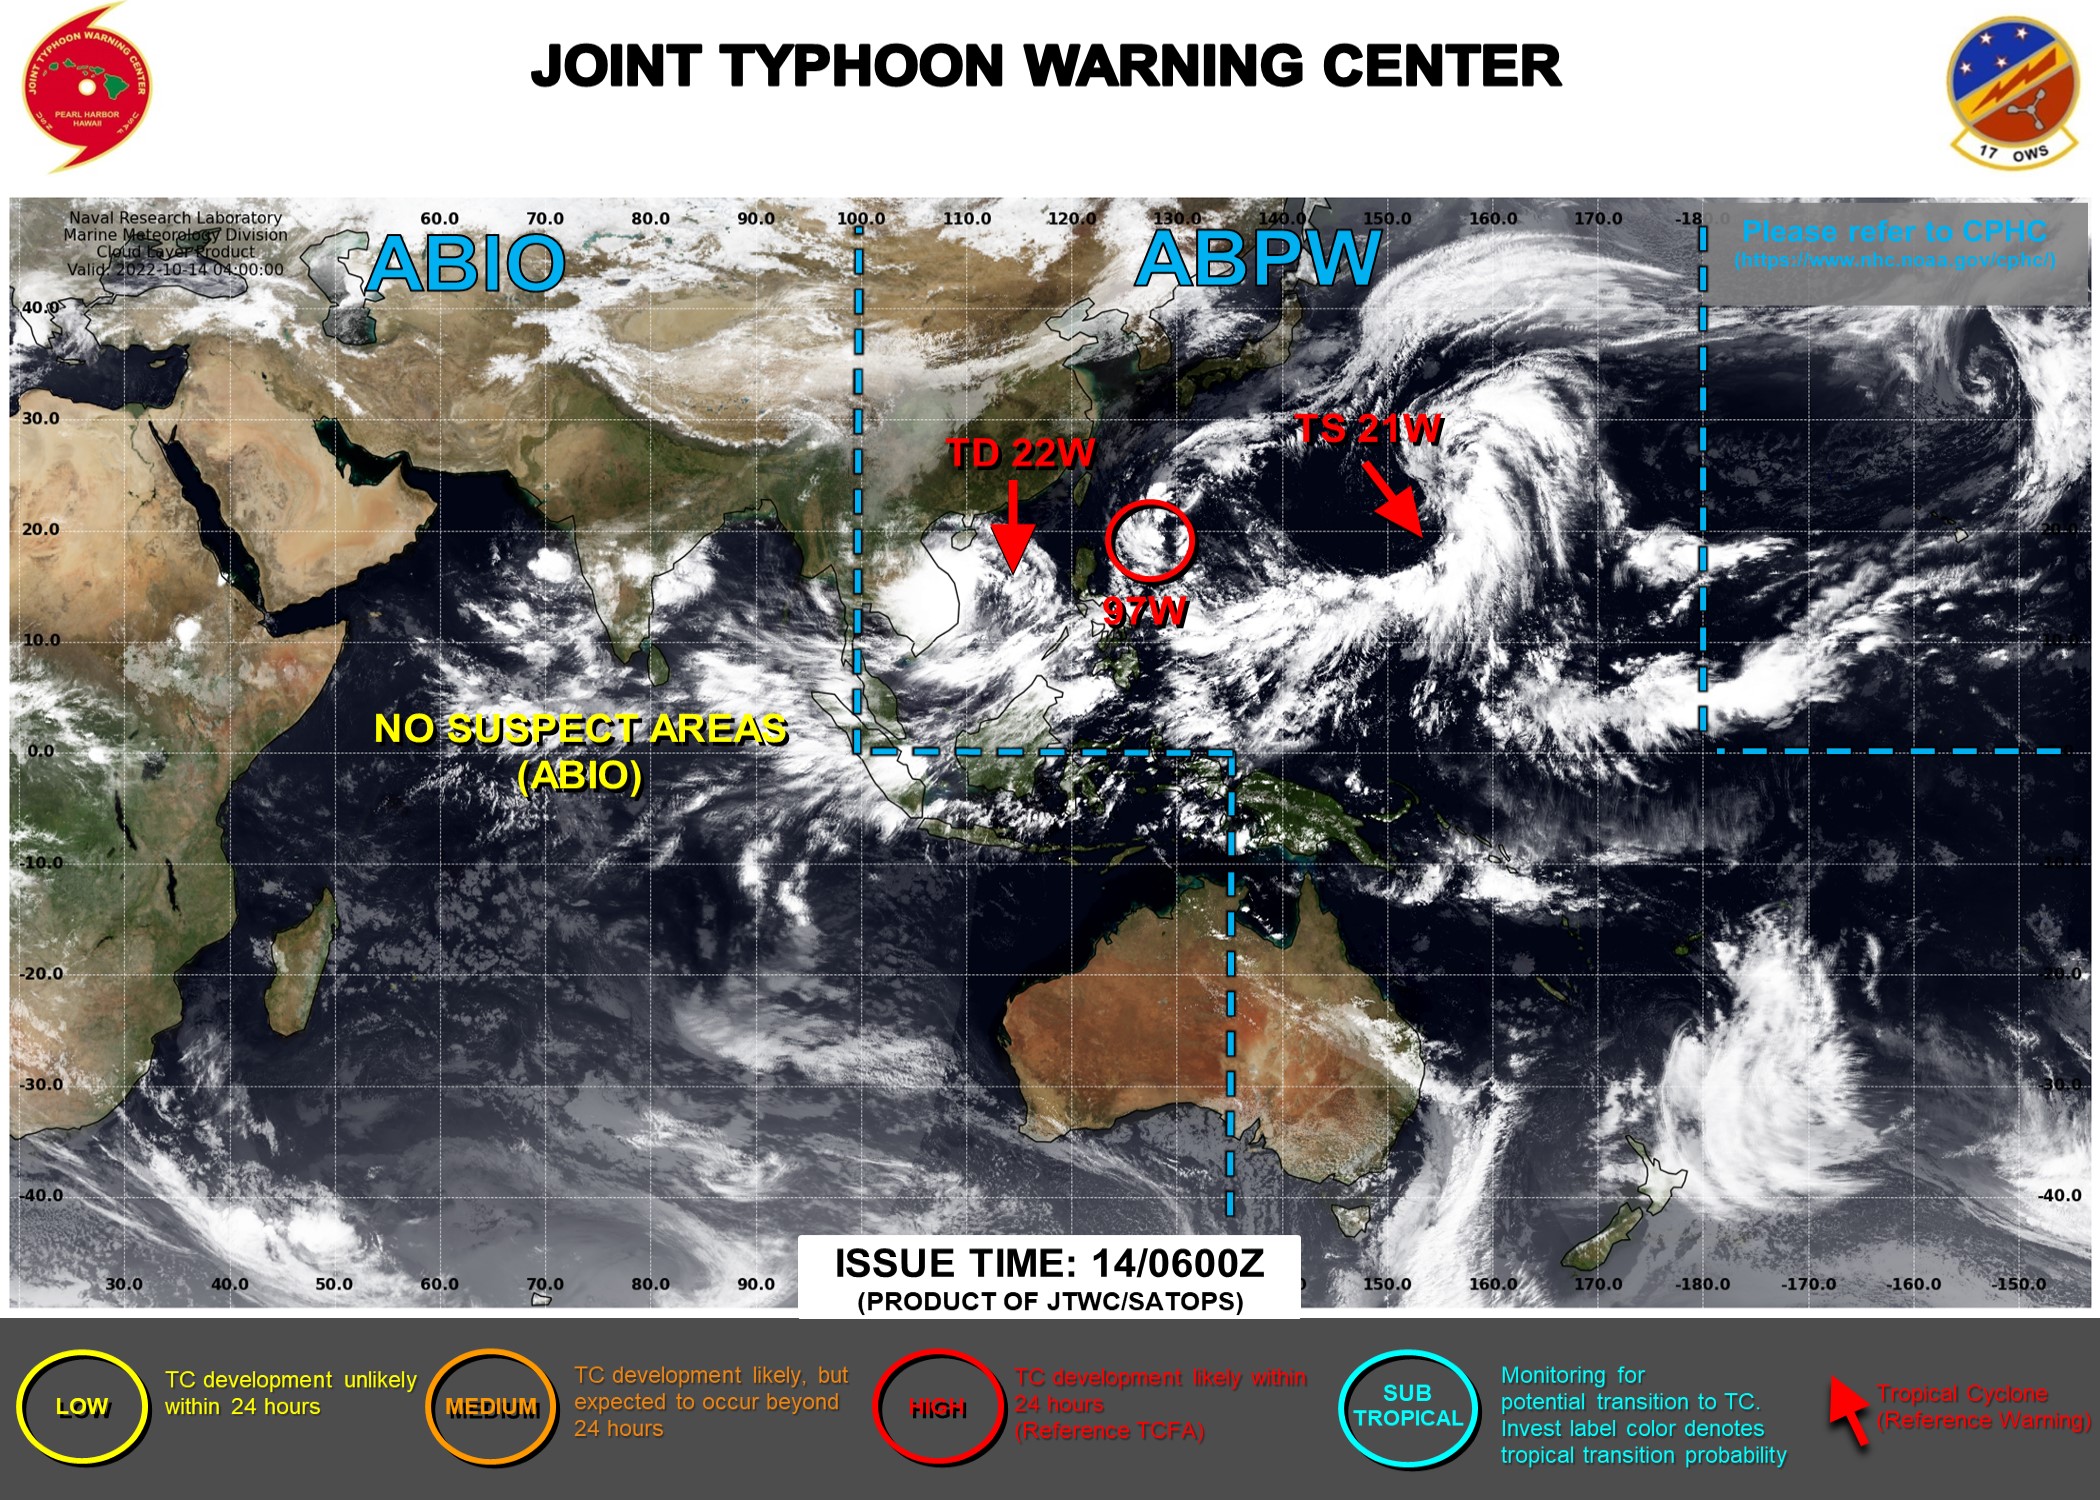 JTWC IS ISSUING 6HOURLY WARNINGS AND 3HOURLY SATELLITE BULLETINS ON 21W AND 22W.3HOURLY SATELLITE BULLETINS  ARE ISSUED ON INVEST 97W.